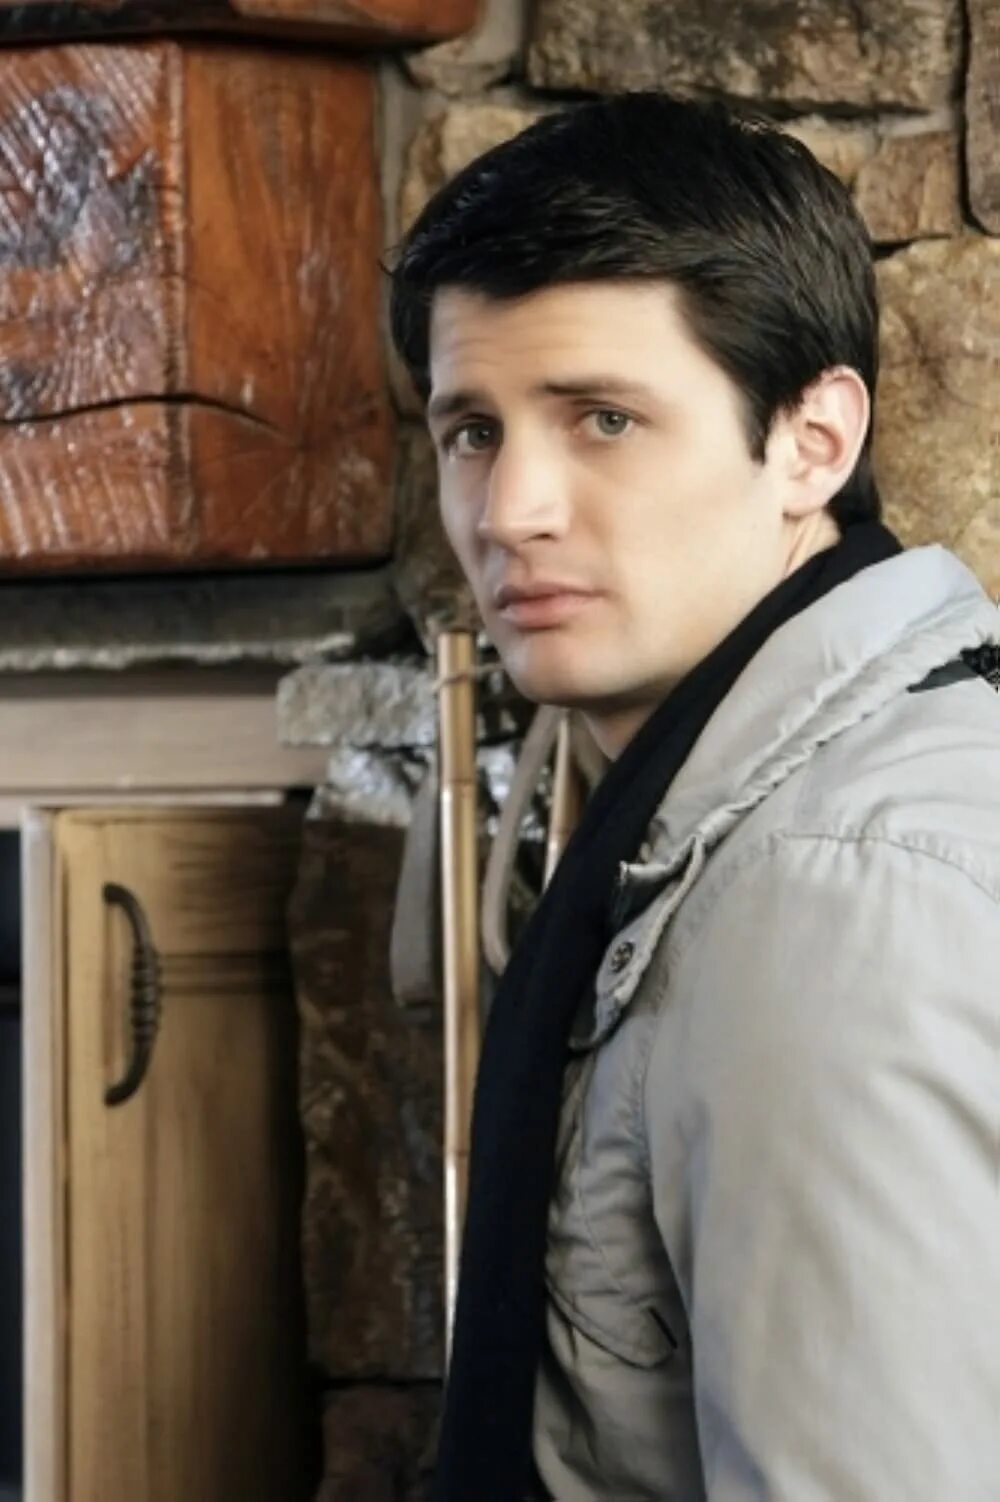 Almost everything. James Lafferty.